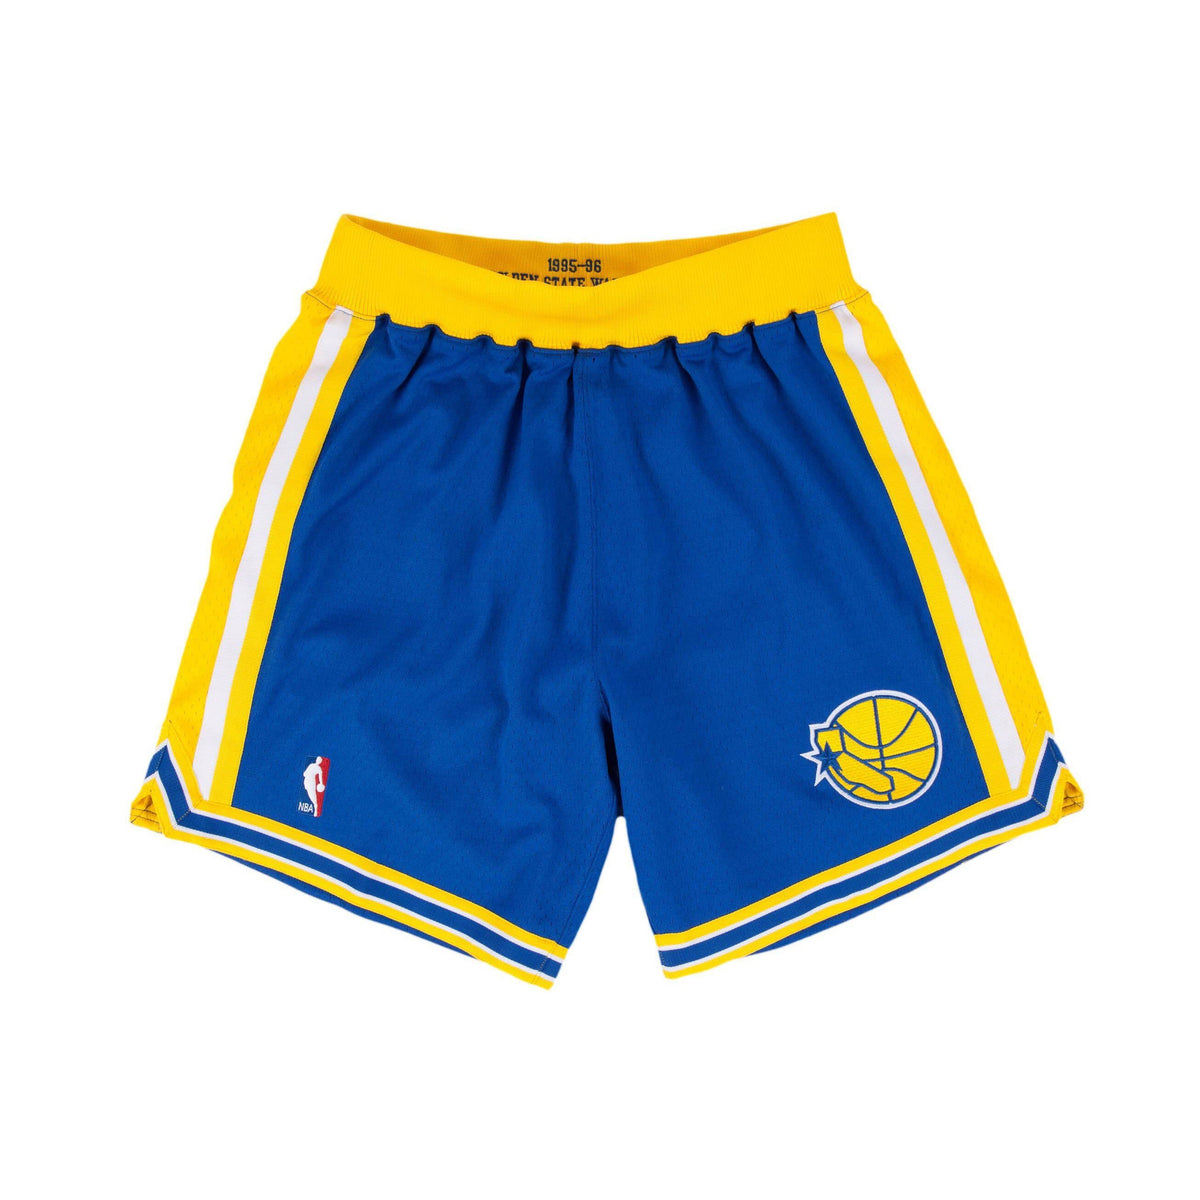 SHORTS - Mitchell & Ness NBA Authentic Shorts Golden State Warriors Royal Yellow 369P31095GSW